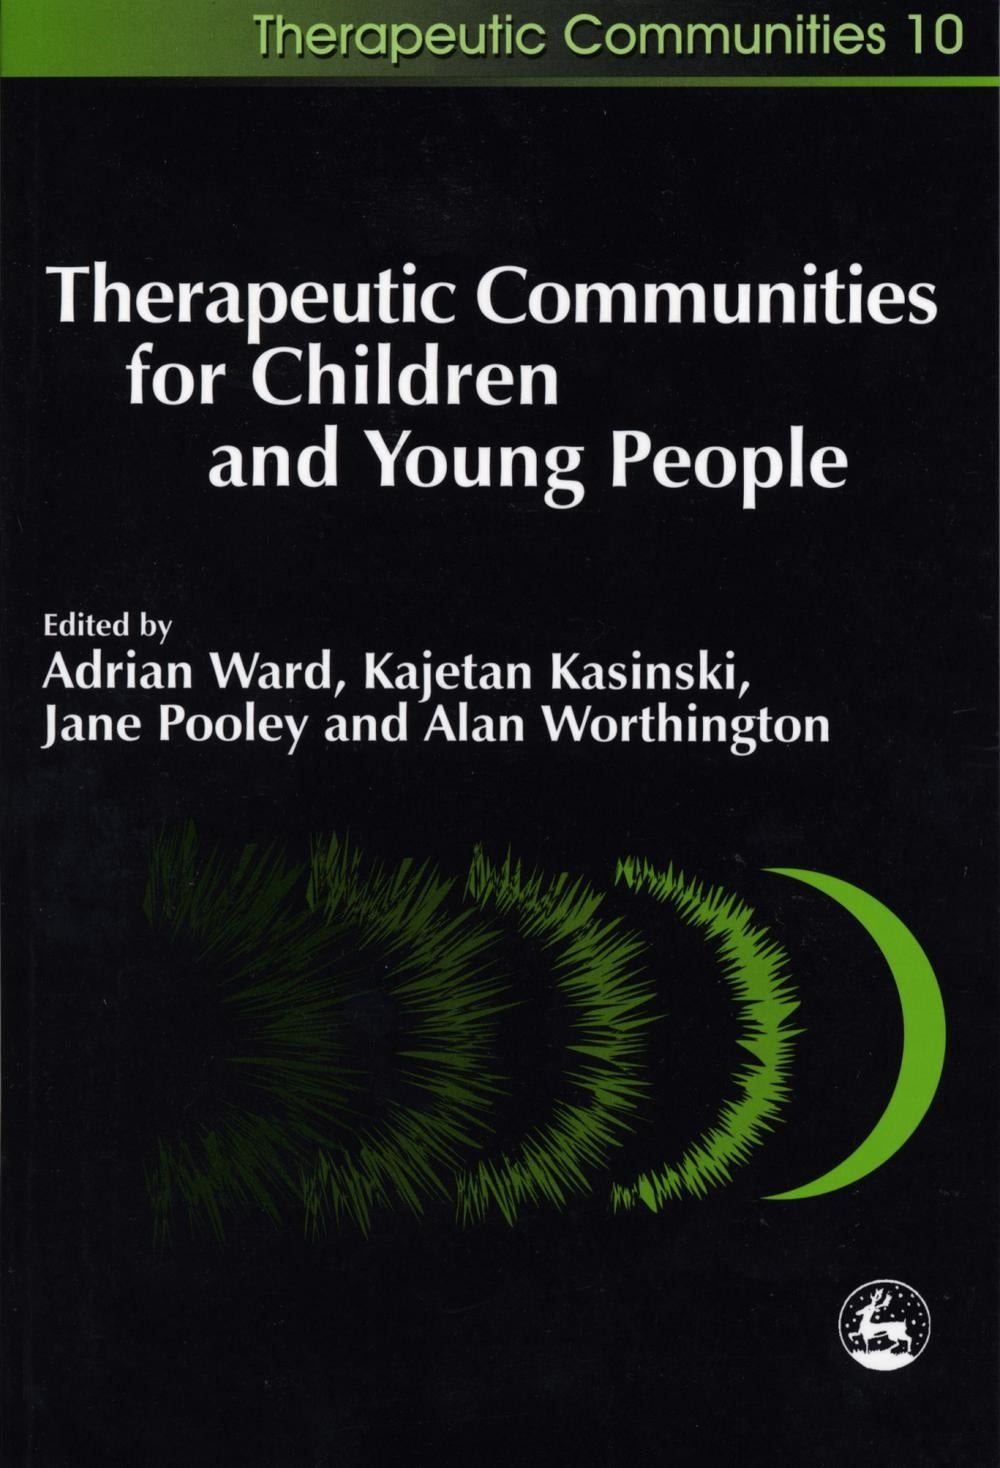 Therapeutic Communities for Children and Young People by Kajetan Kasinski, Jane Pooley, Alan Worthington, Adrian Ward, No Author Listed